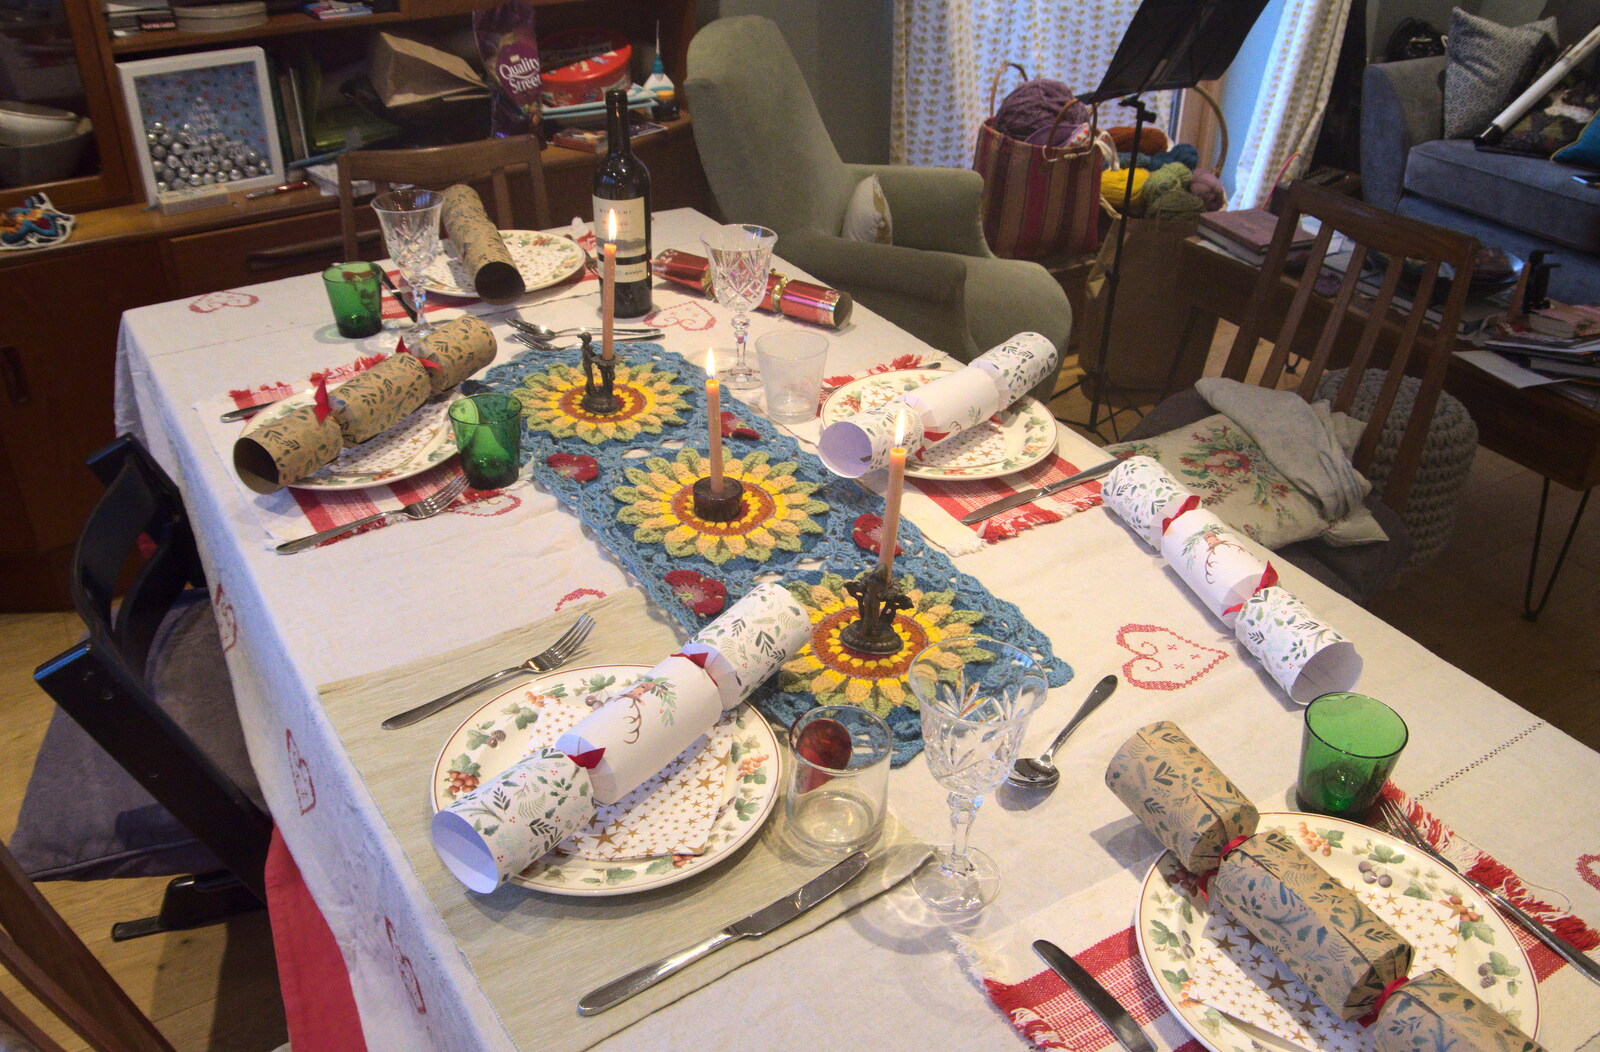 The Christmas table from Christmas Day, Brome, Suffolk - 25th December 2020